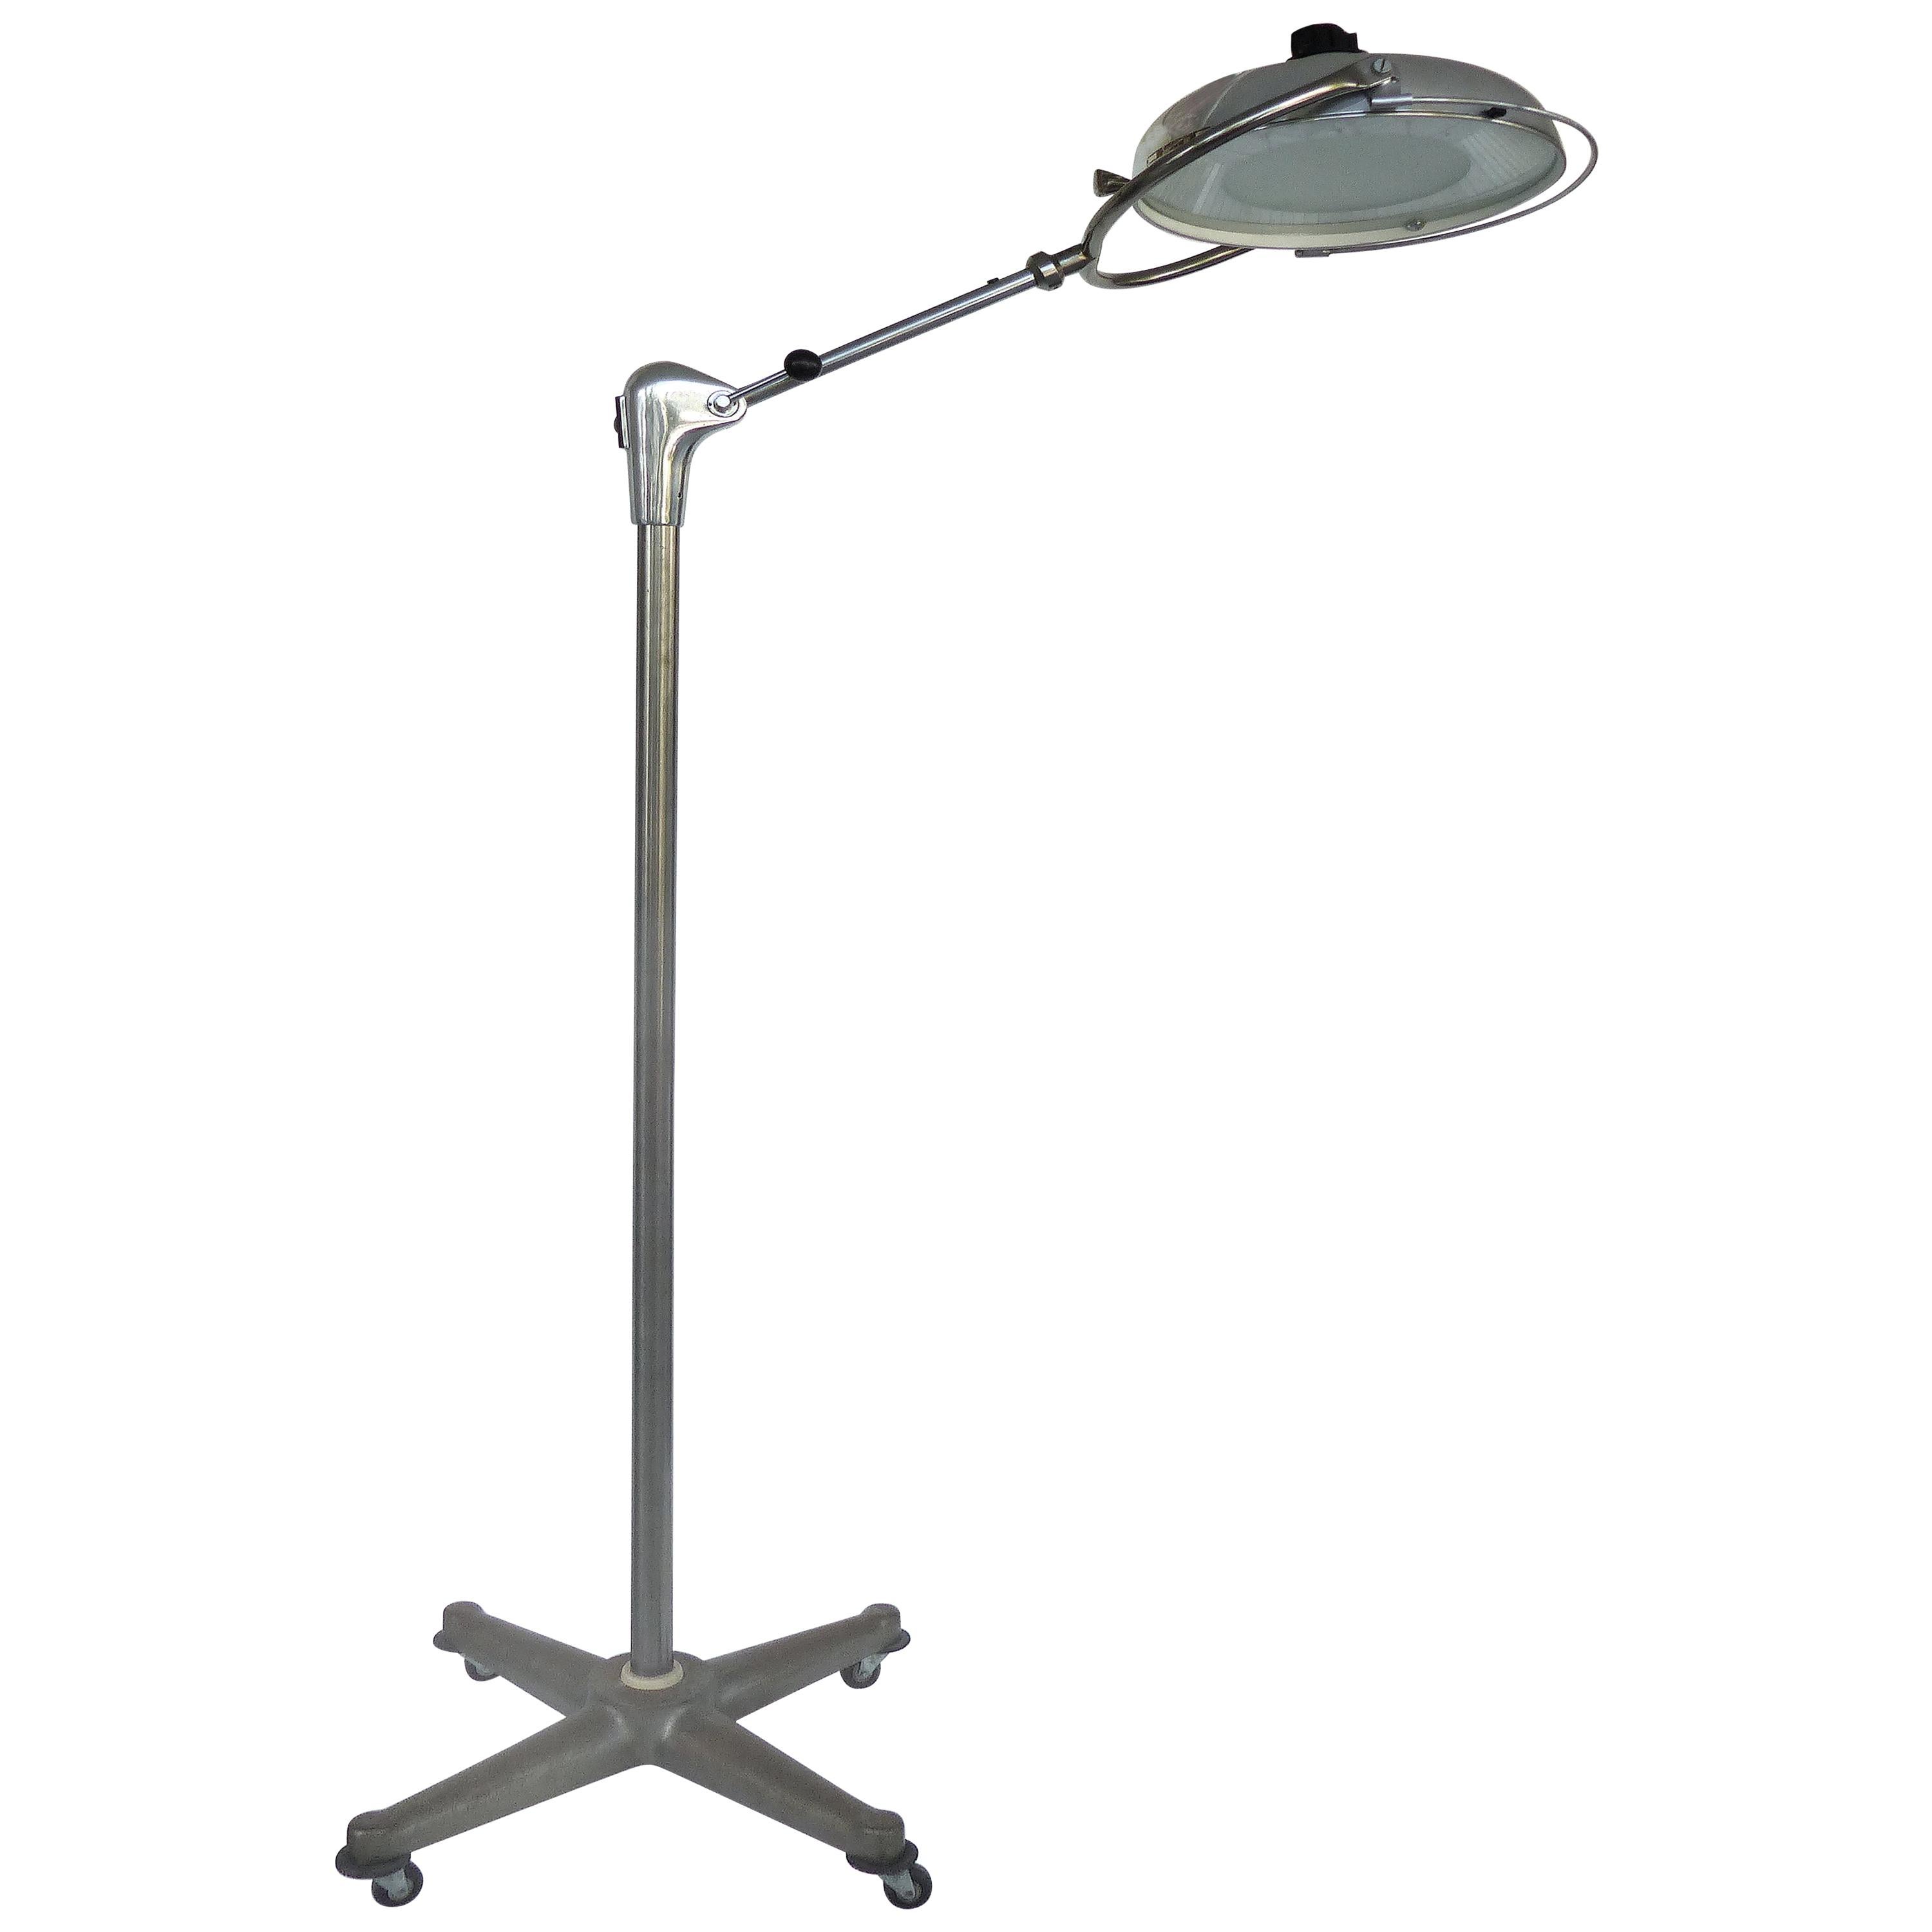 Scialytique French Industrial Surgical Floor Lamp with Pivoting Adjustable Arm For Sale